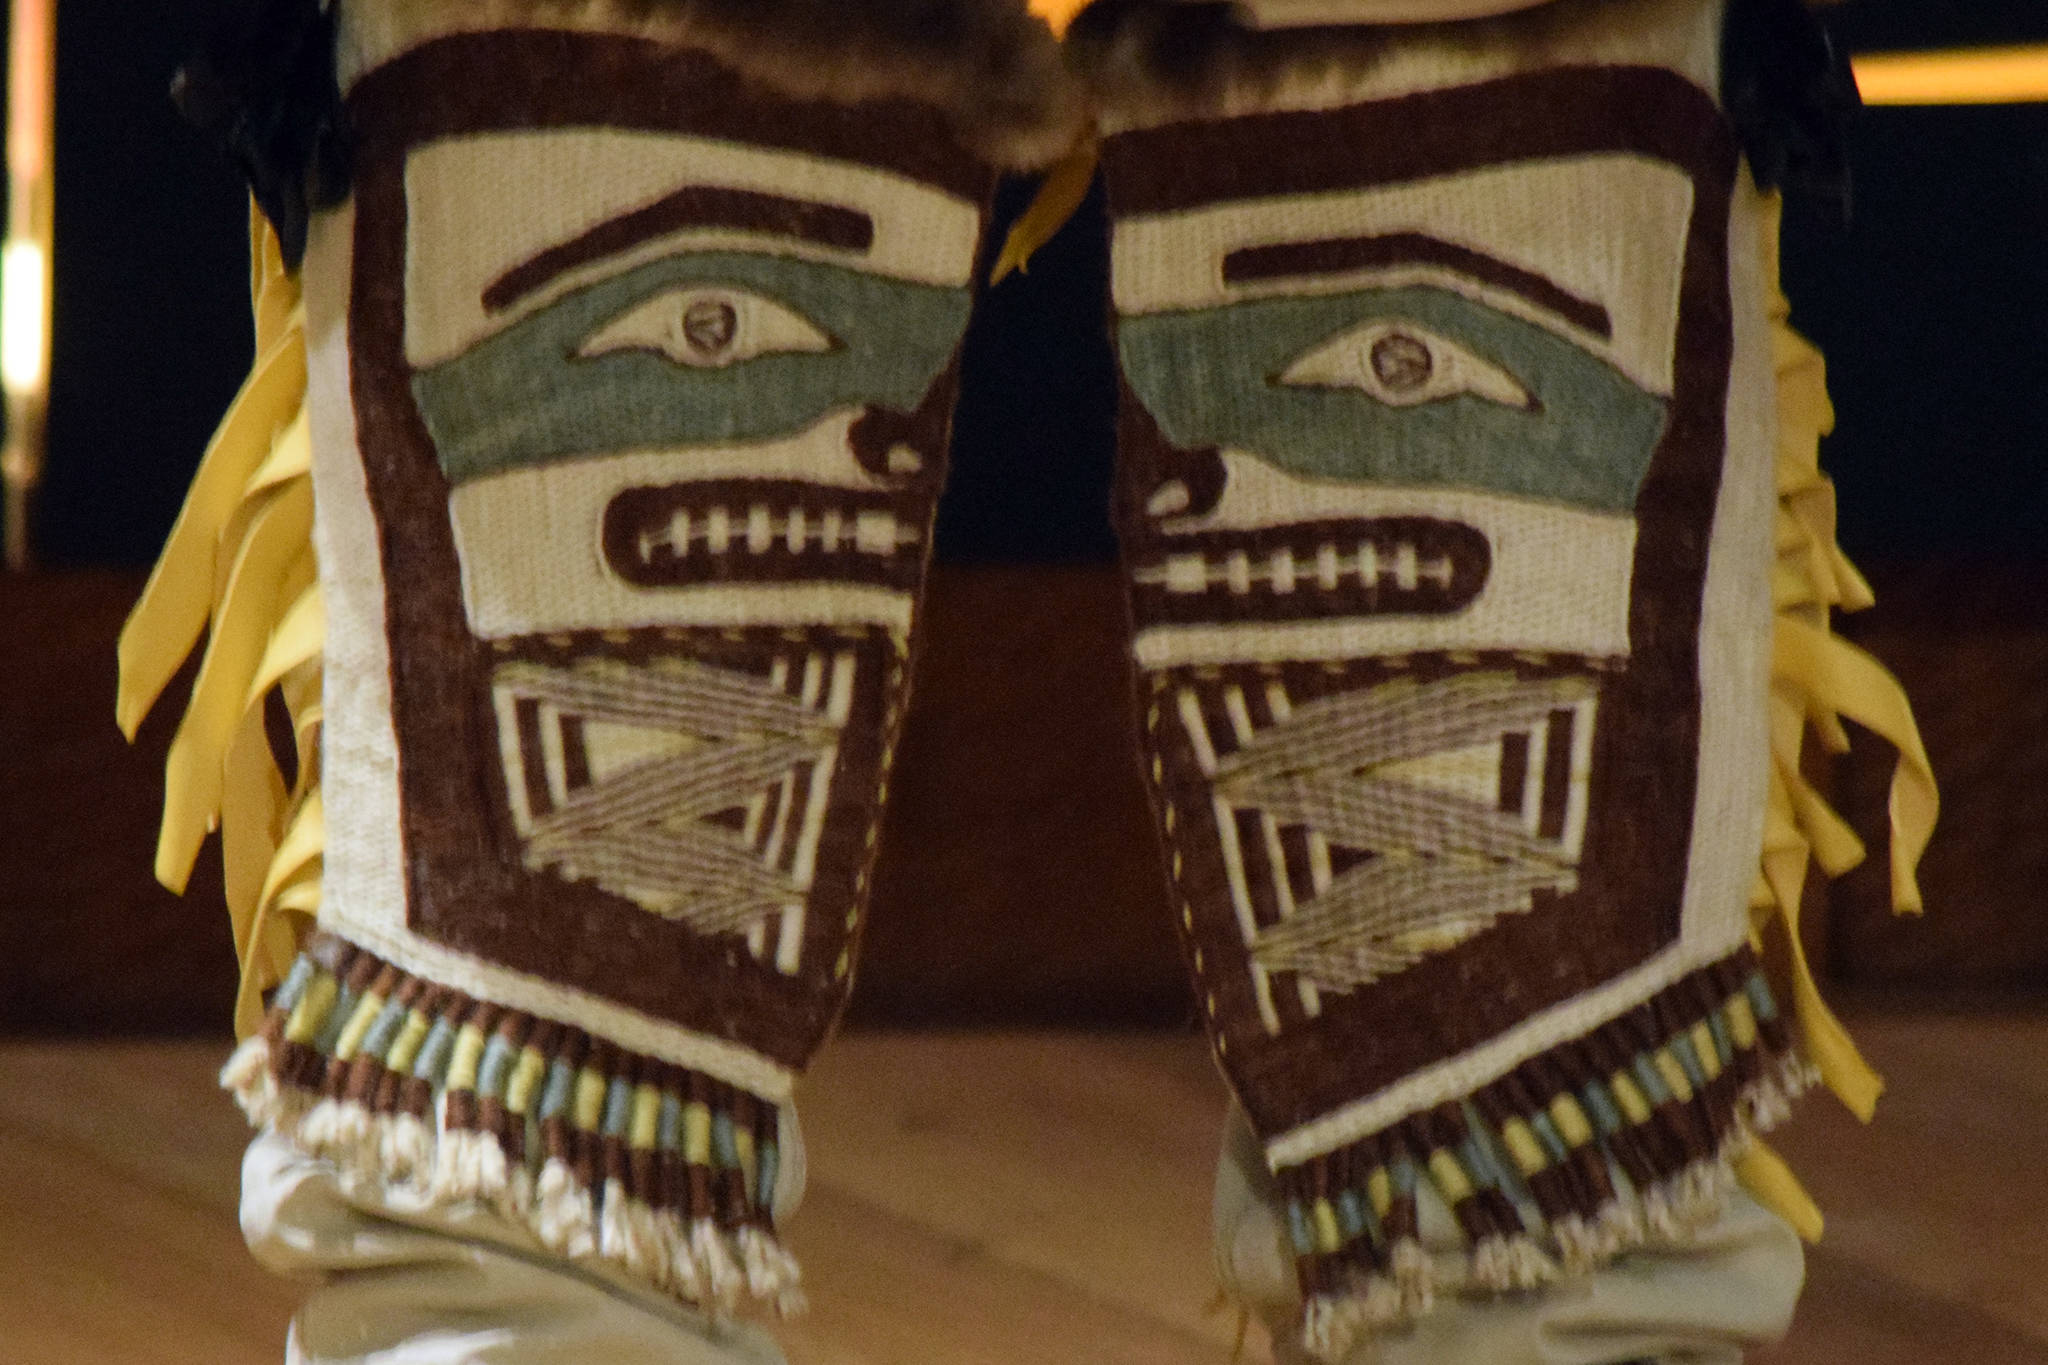 Chilkat dance leggings made by weavers Anastasia Shaawaat Ku Gei Hobson-George and Lily Hope were the subject of a presentation Friday, May 31, 2019. (Ben Hohenstatt | Juneau Empire)